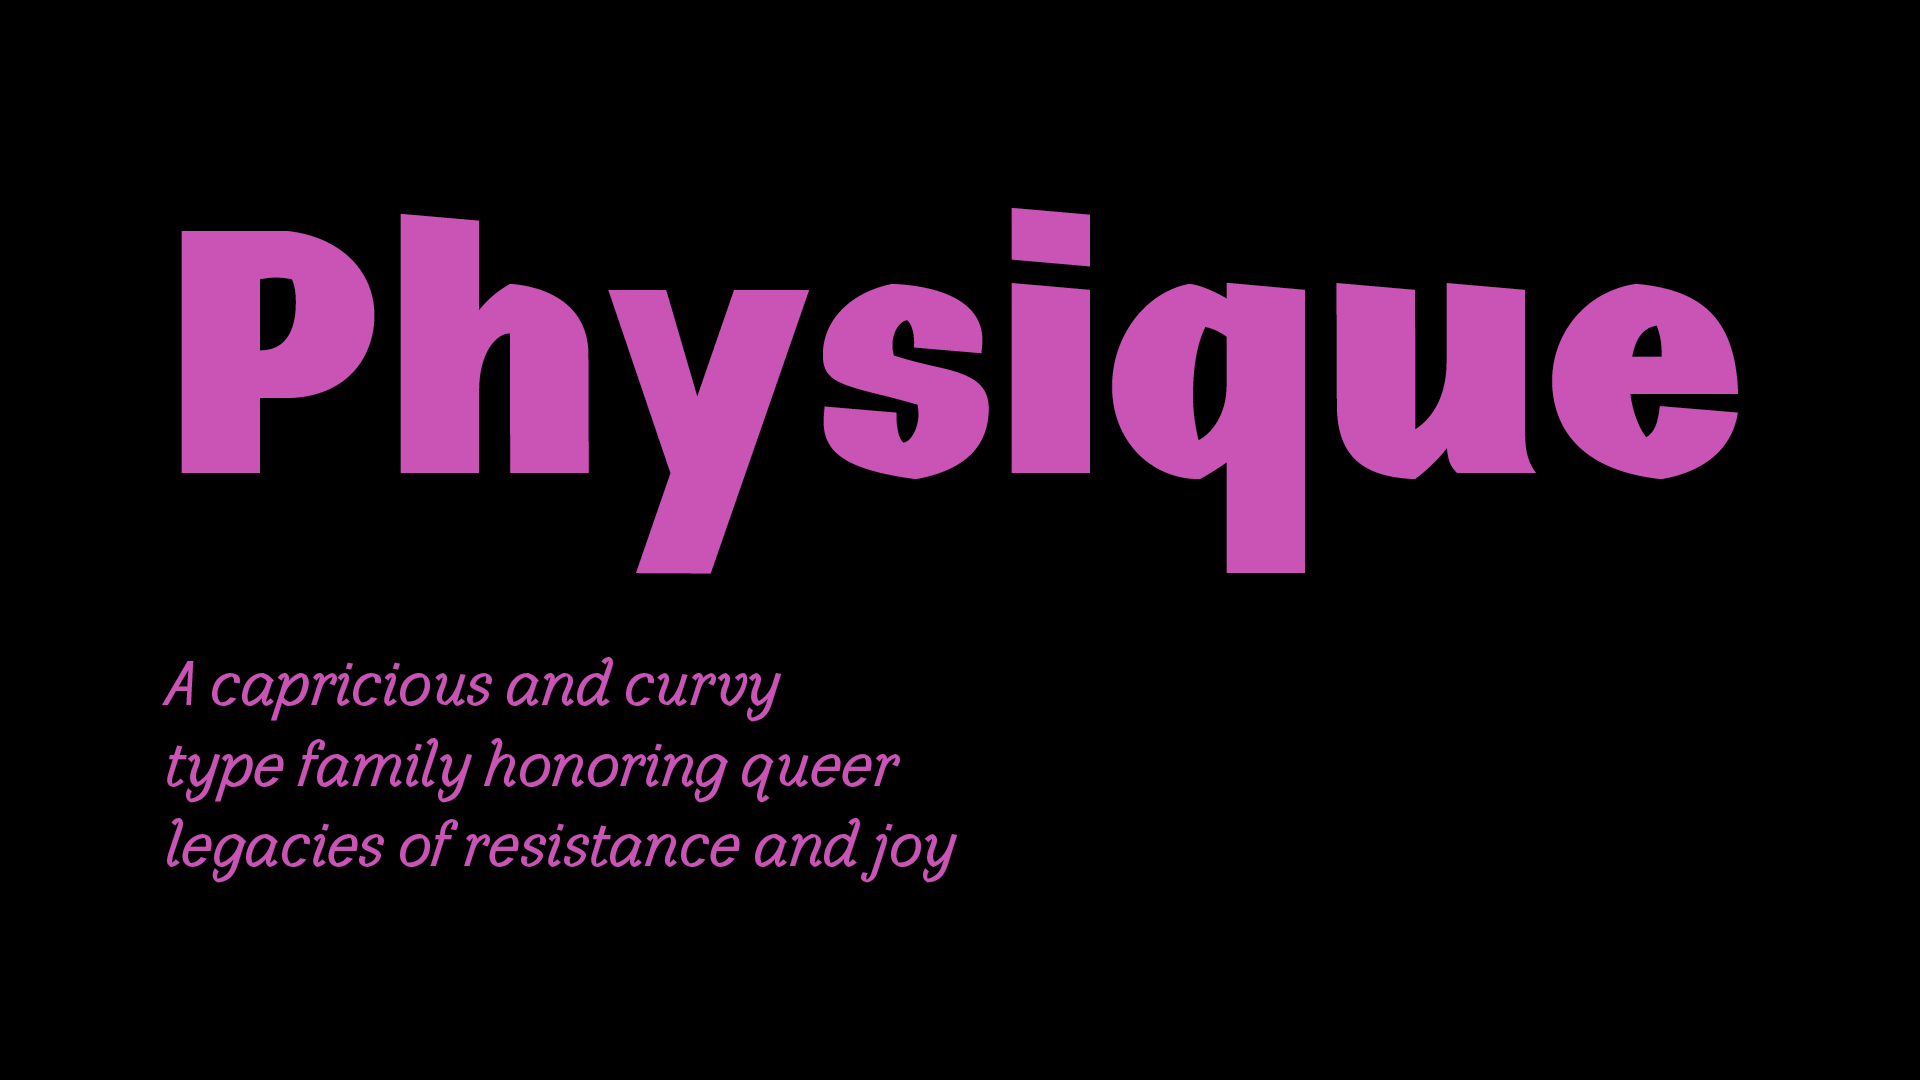 Physique: A capricious and curvy type family honoring queer legacies of resistance and joy.